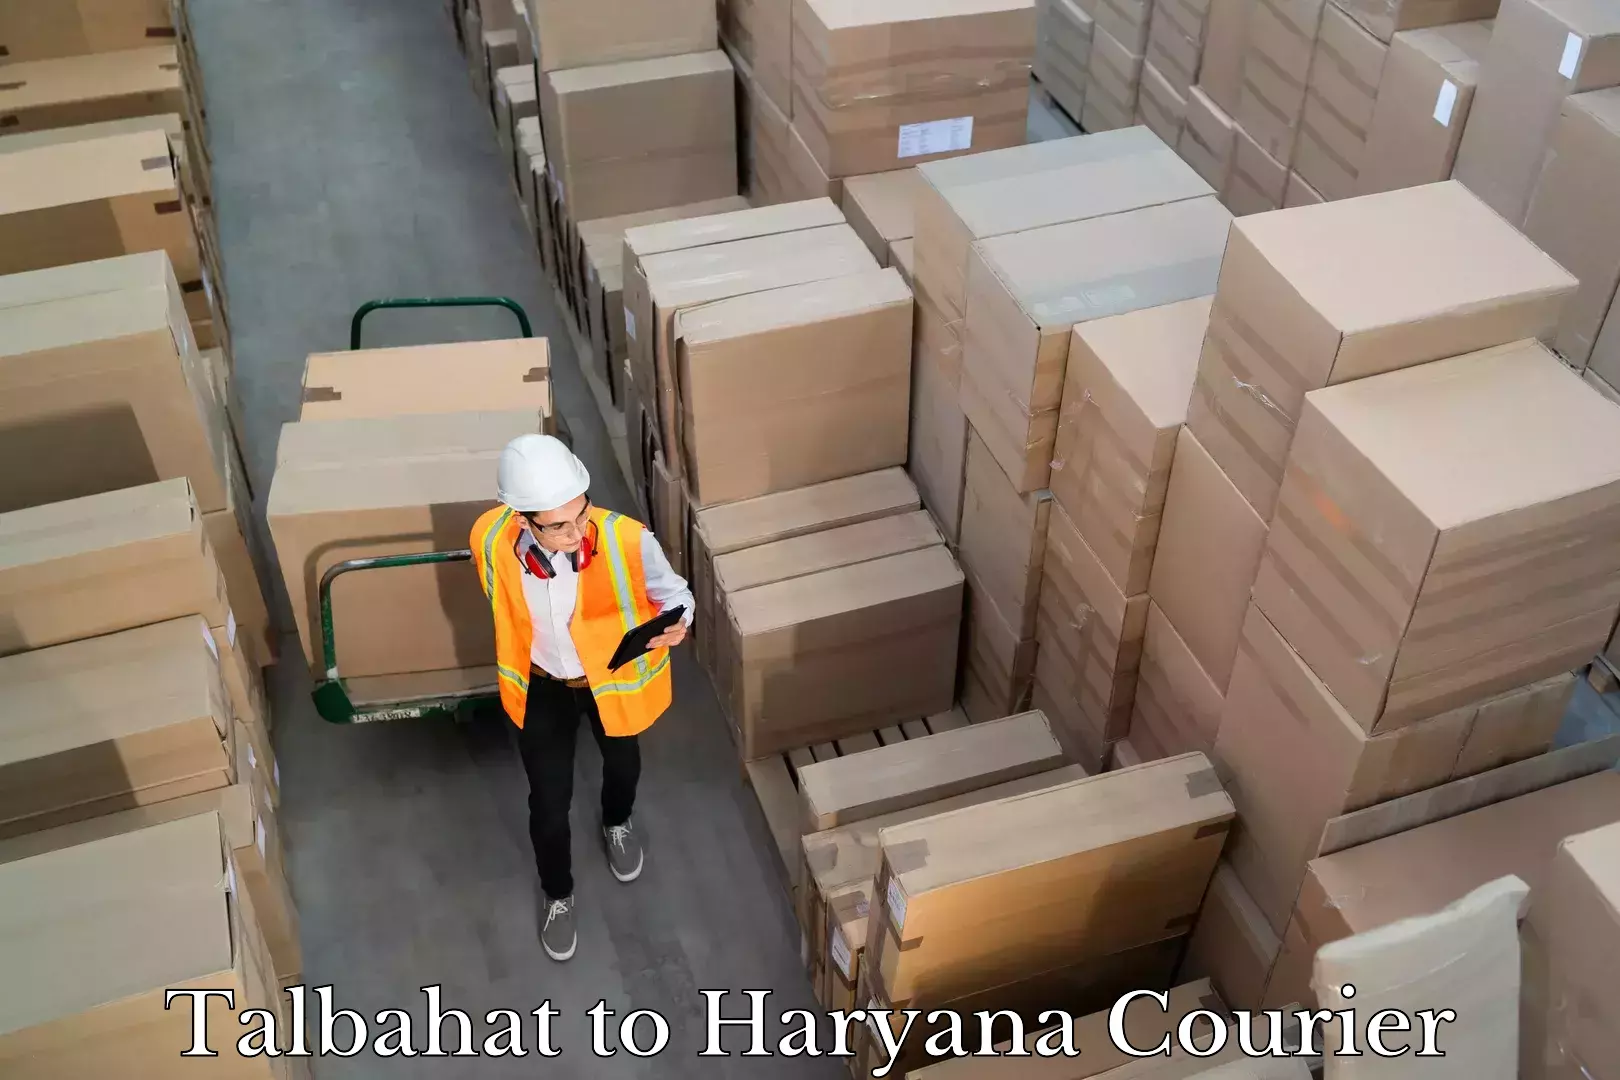 Emergency parcel delivery in Talbahat to Haryana